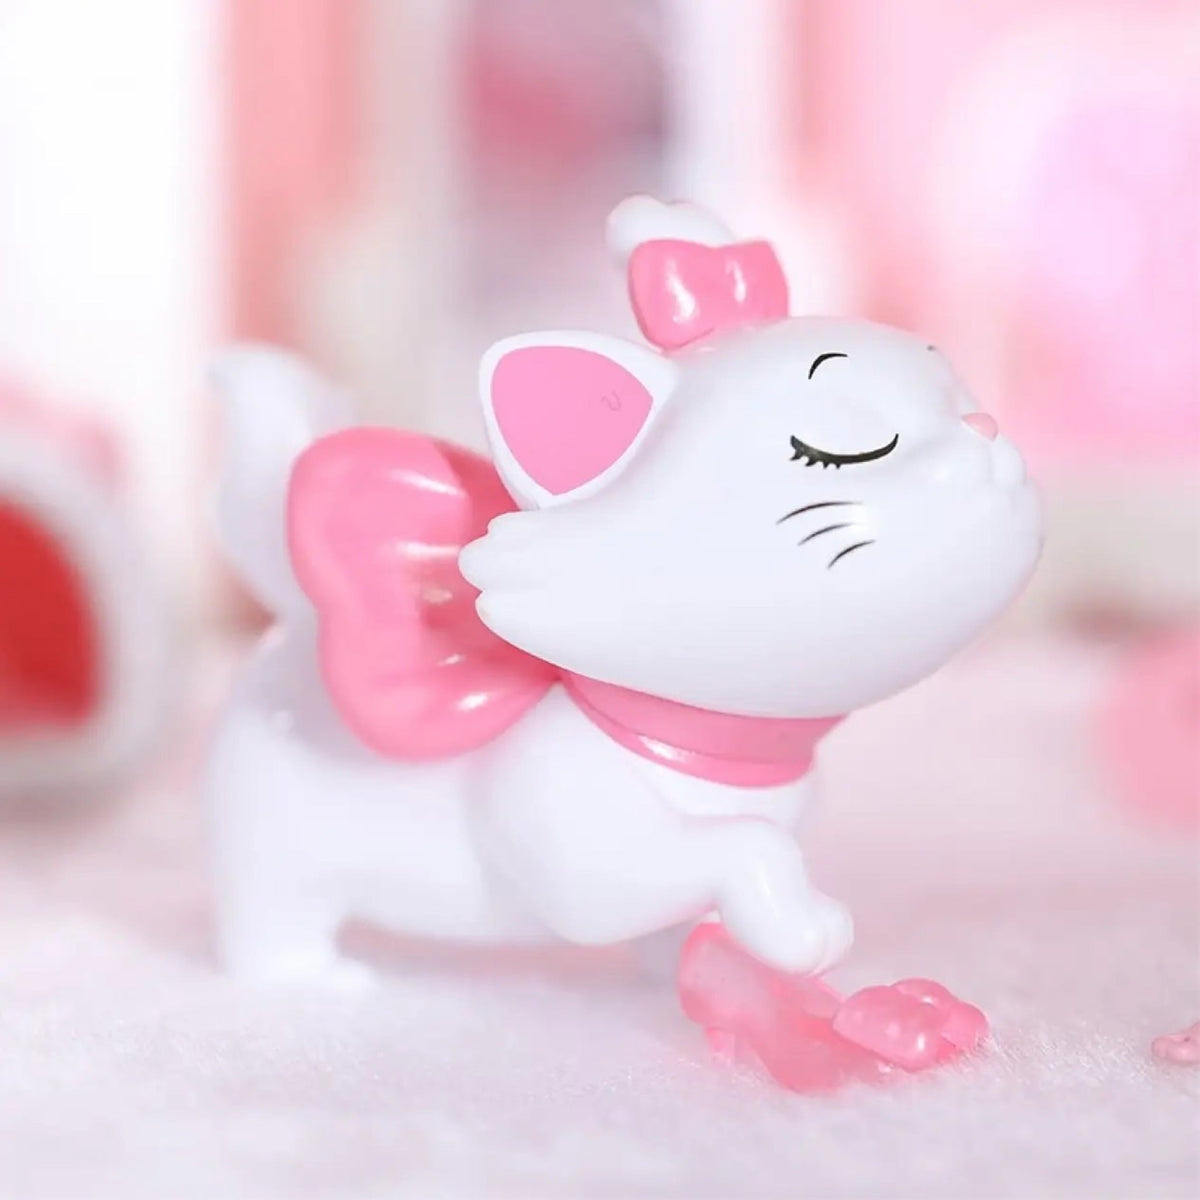 Top Toy x Disney Marie Cat Beauty Diary Series-Single Box (Random)-TopToy-Ace Cards &amp; Collectibles